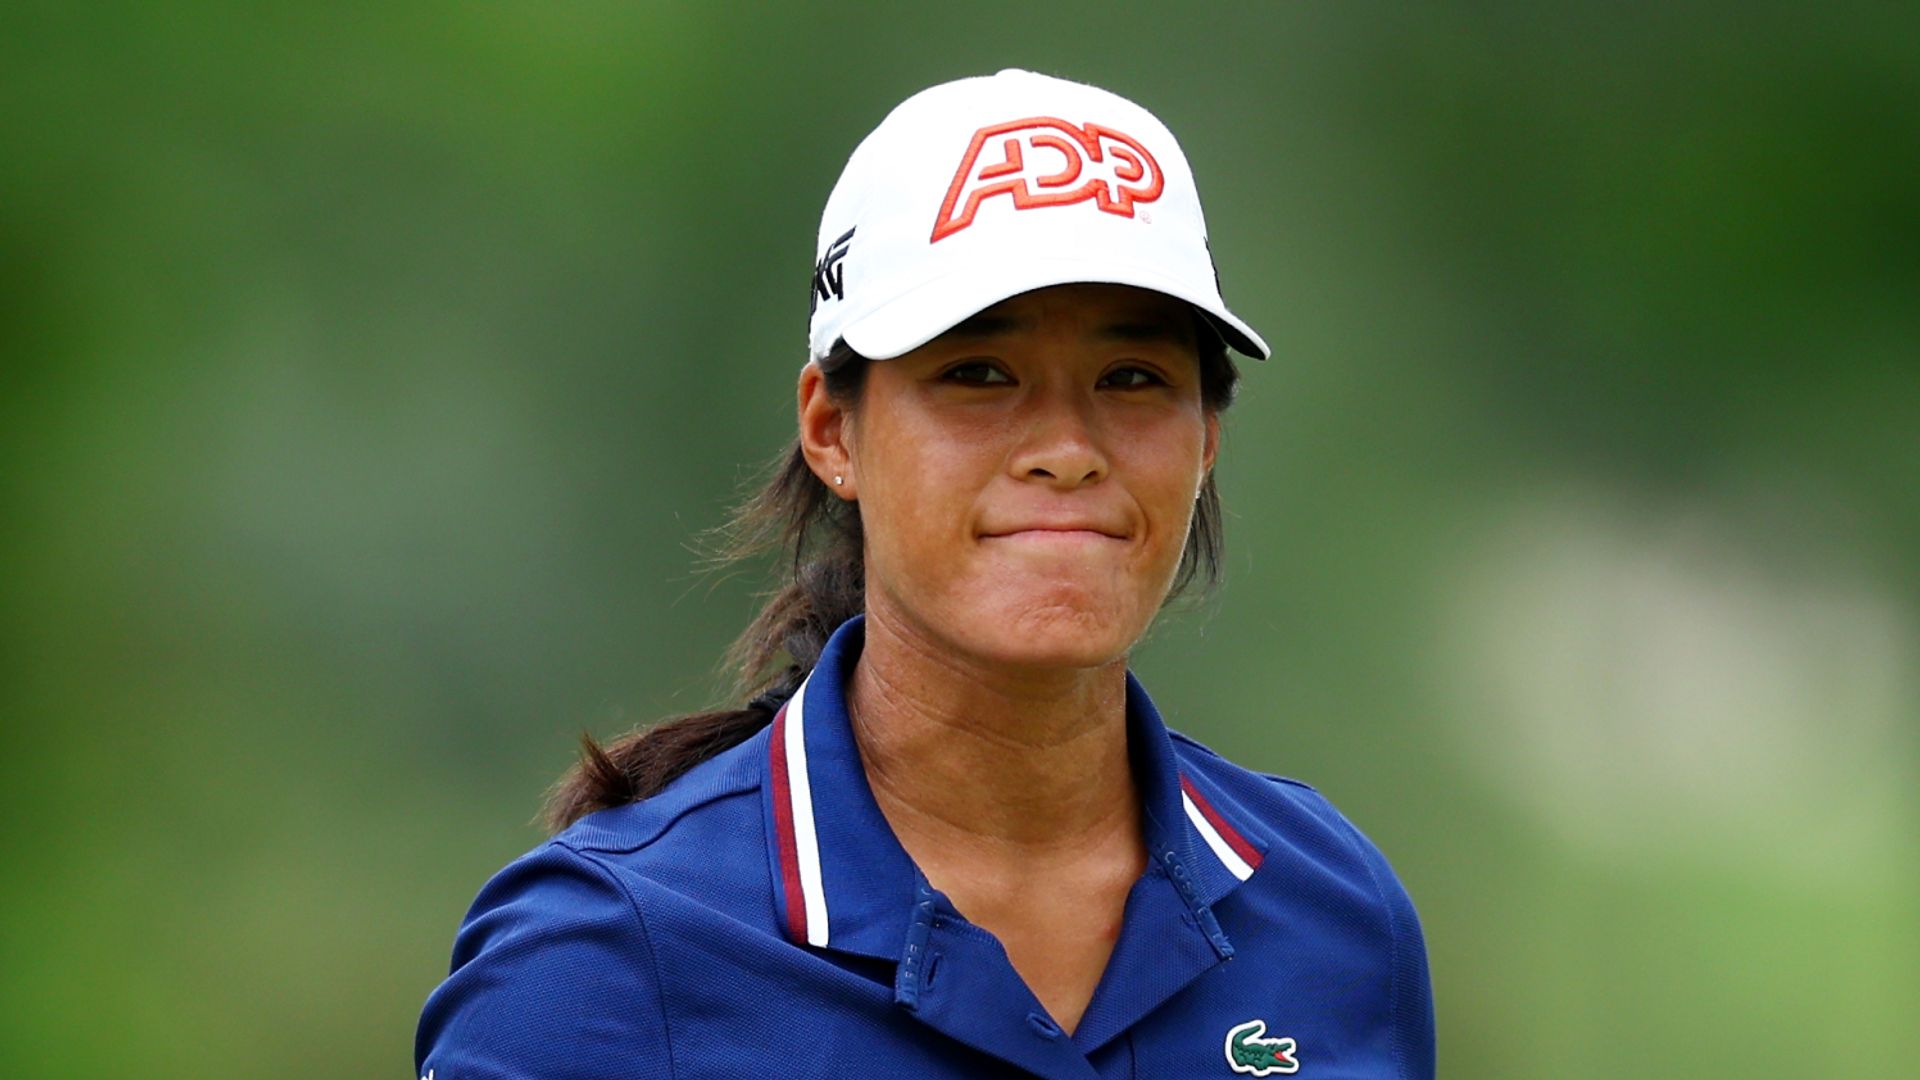 Boutier takes lead in Singapore after brilliant second-round 64